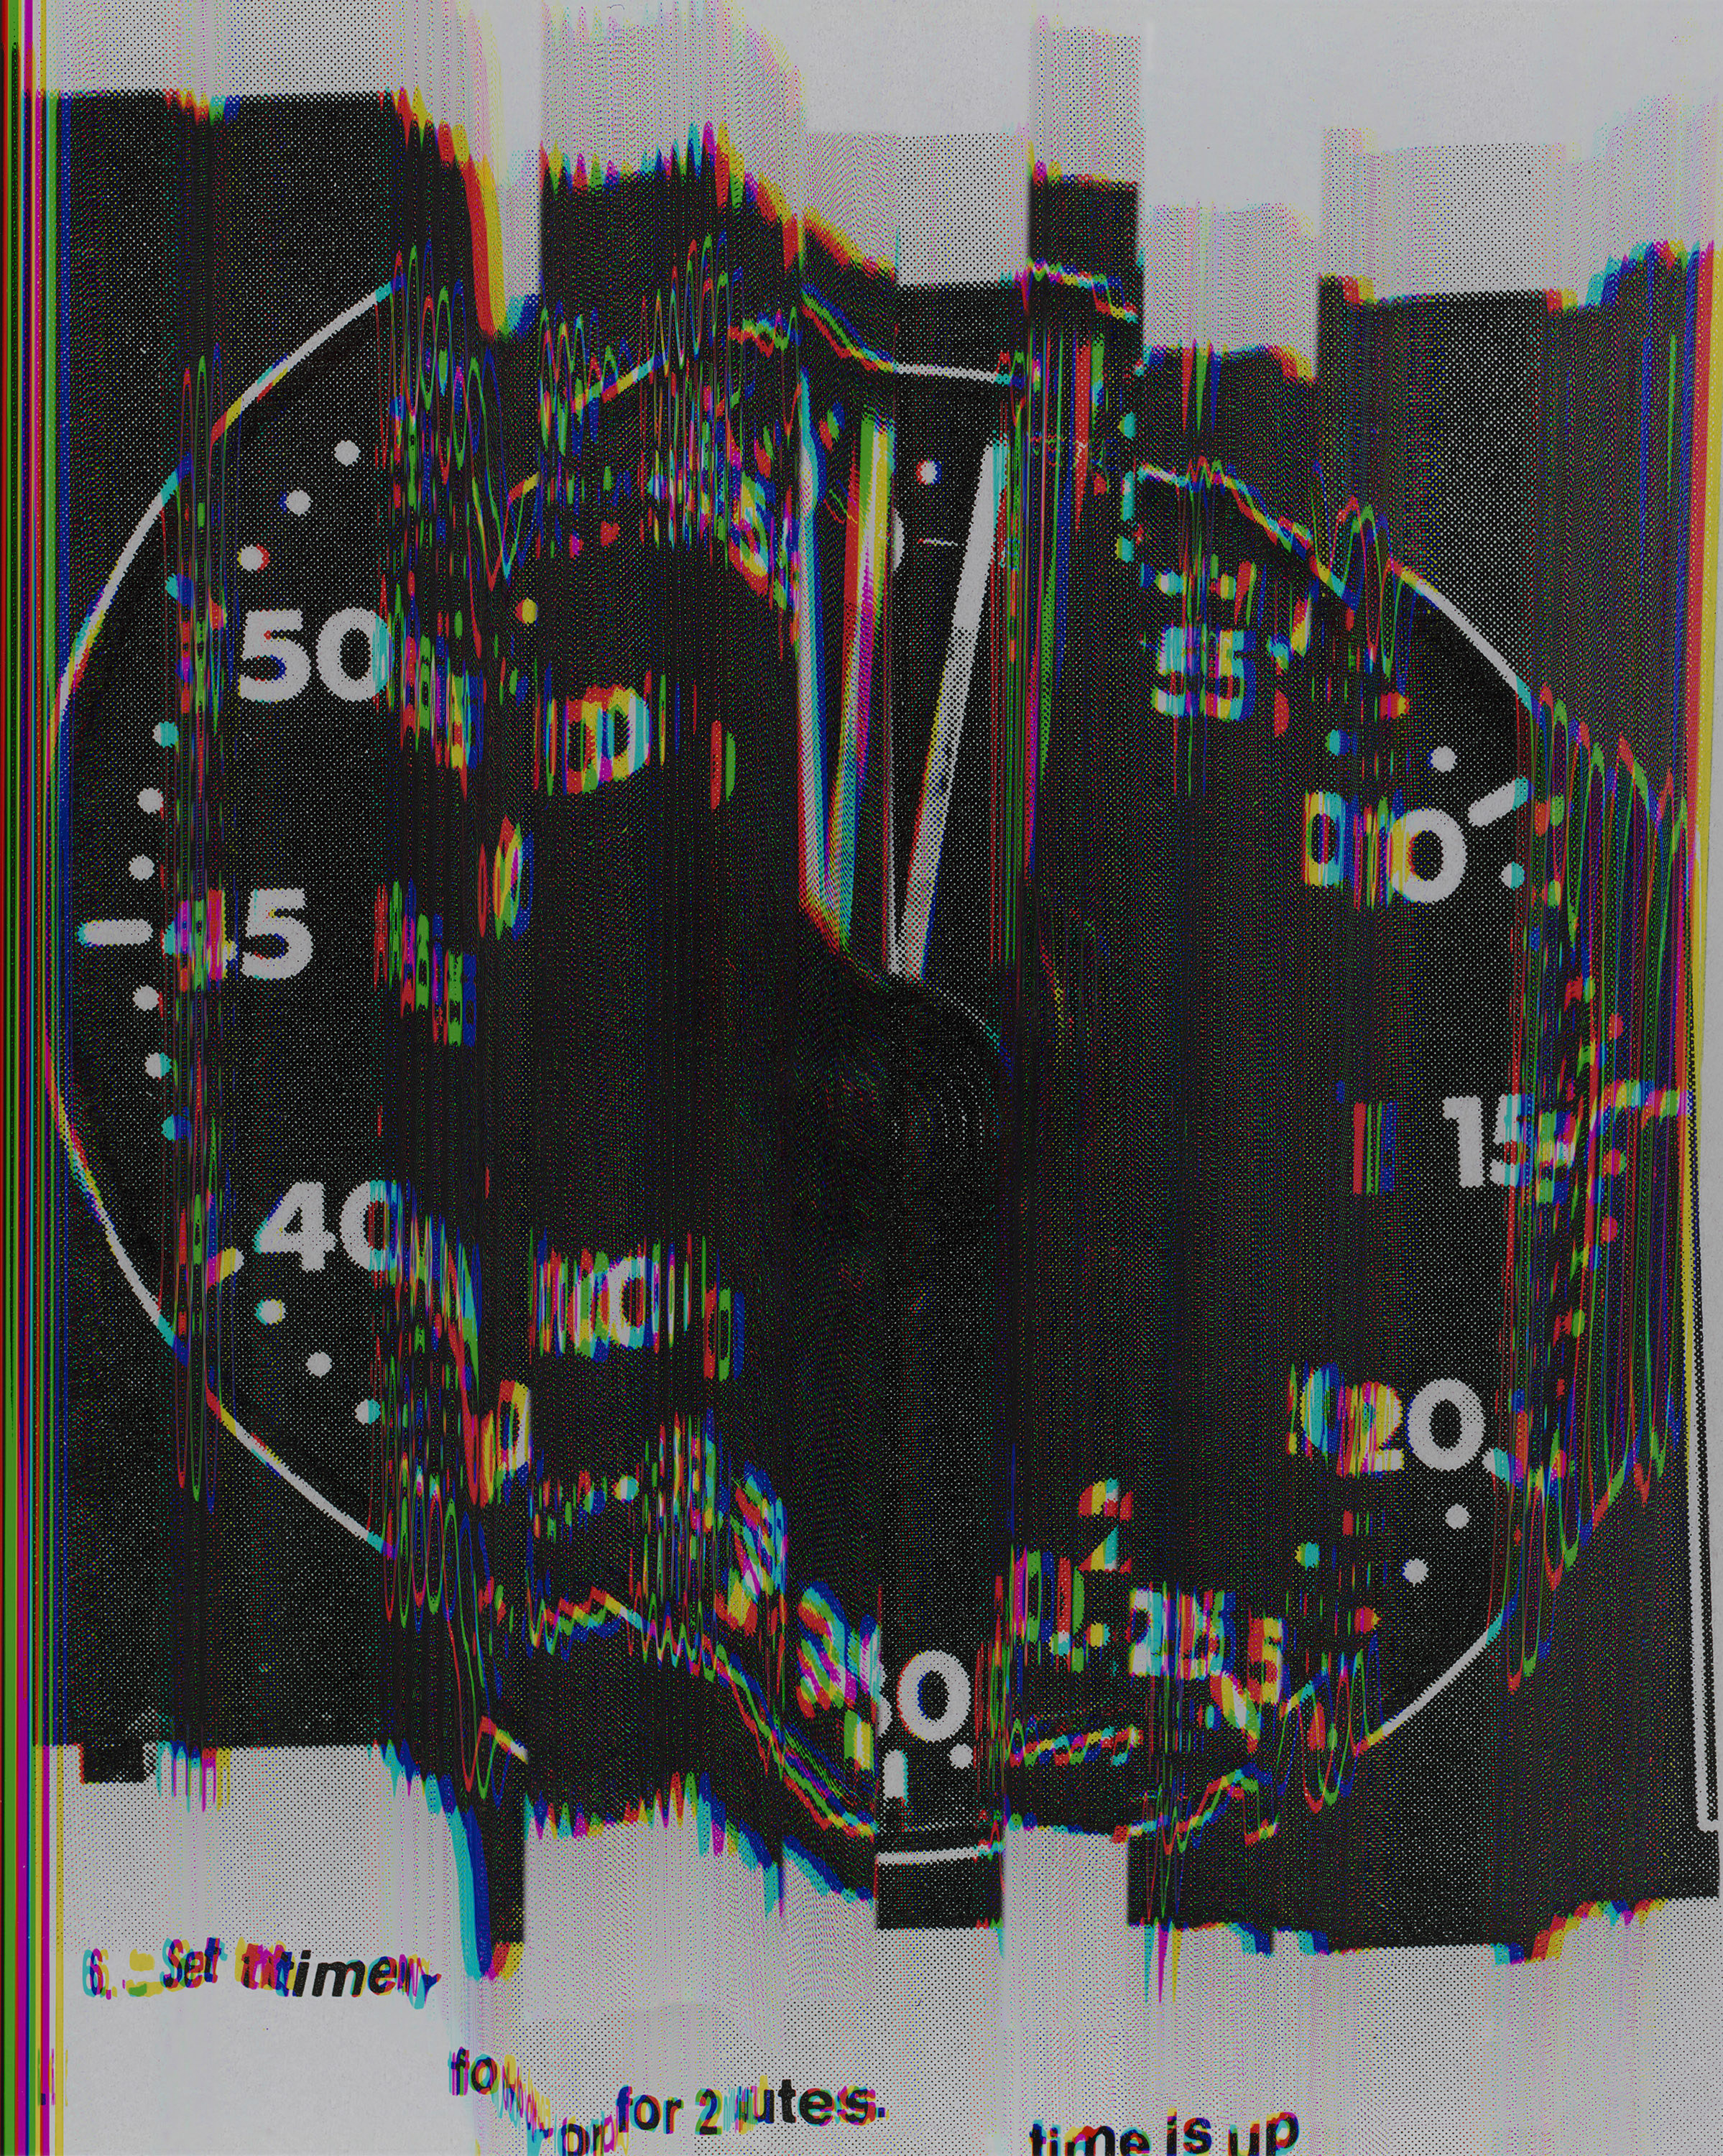 A distorted photo of a speedometer or clock